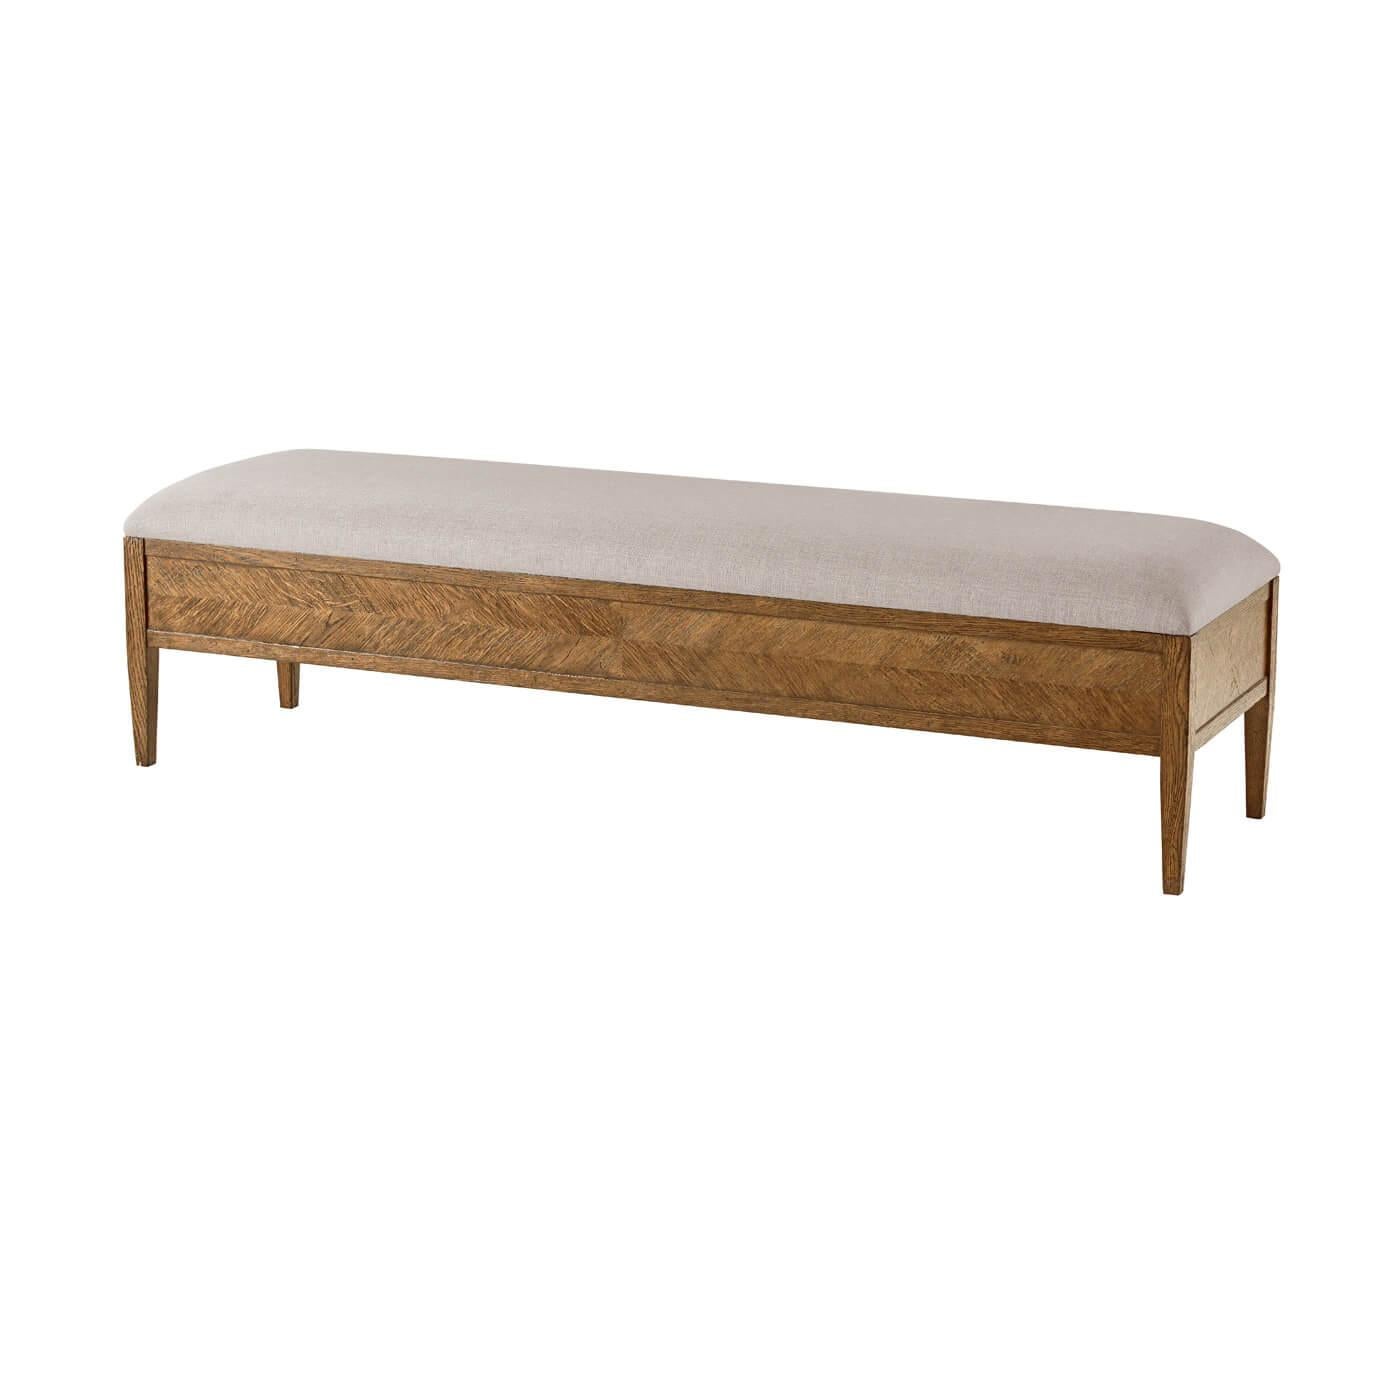 Oak Parquetry Upholstered Bench, Light Oak In New Condition For Sale In Westwood, NJ